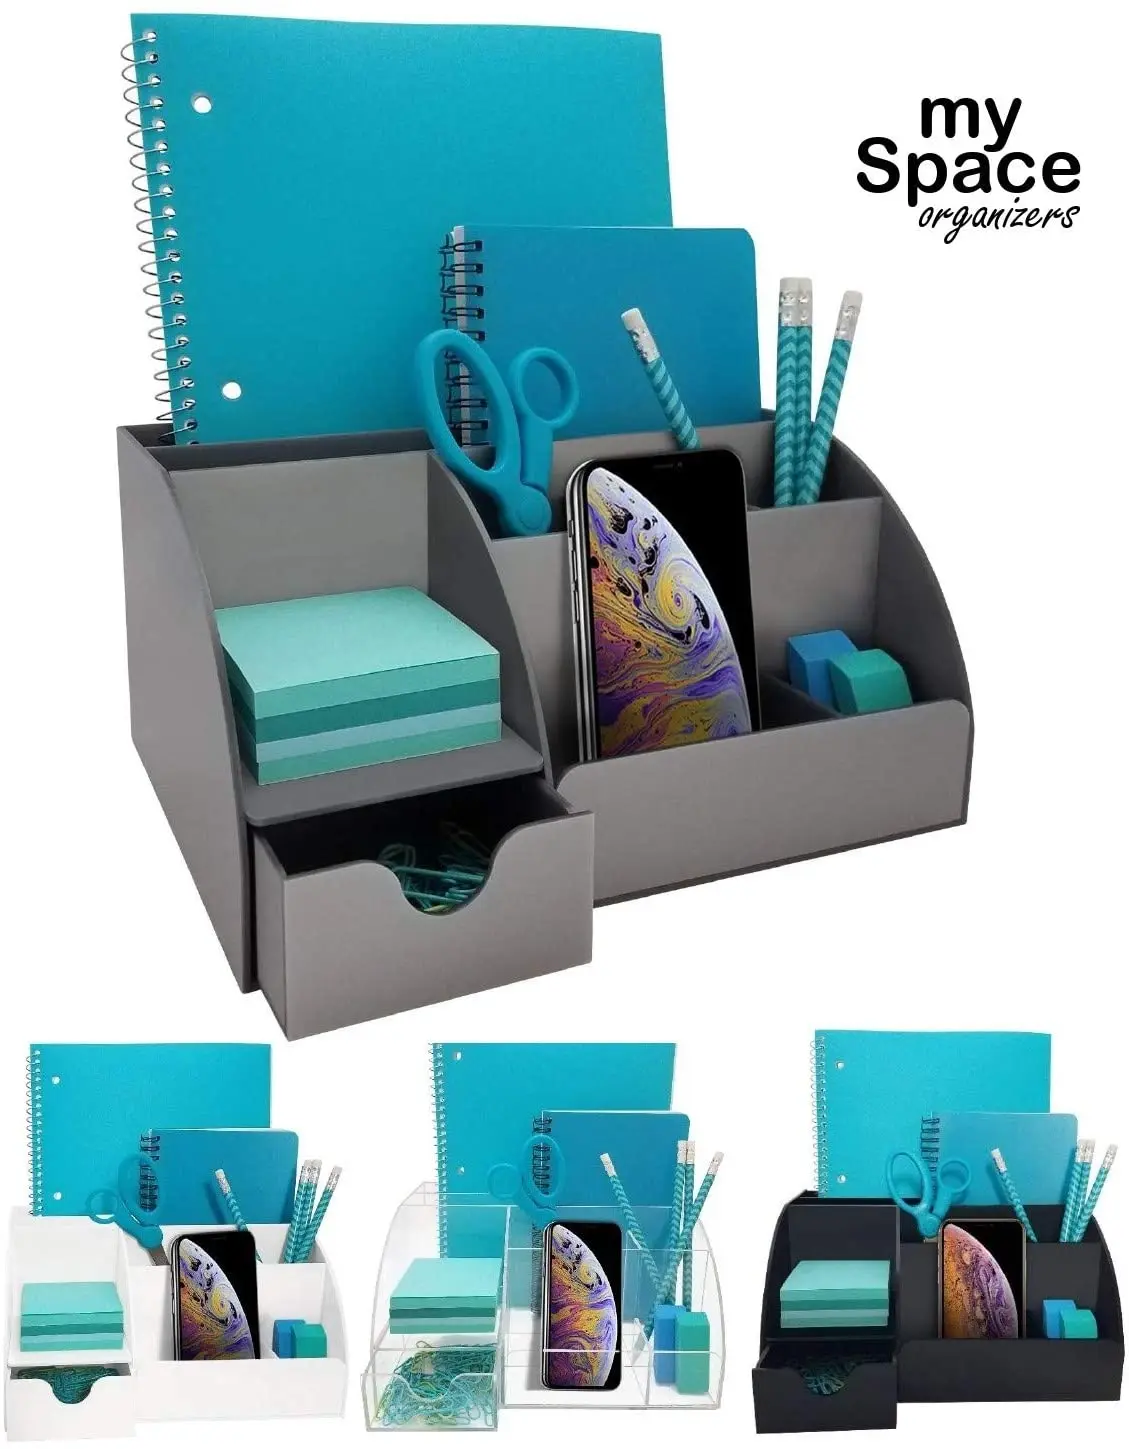 Gray Enhance Your Office Decor with This Desktop Organizer 9 Compartments All in One Office Supplies and Cool Desk Accessories Organizer Acrylic Office Desk Organizer with Drawer 